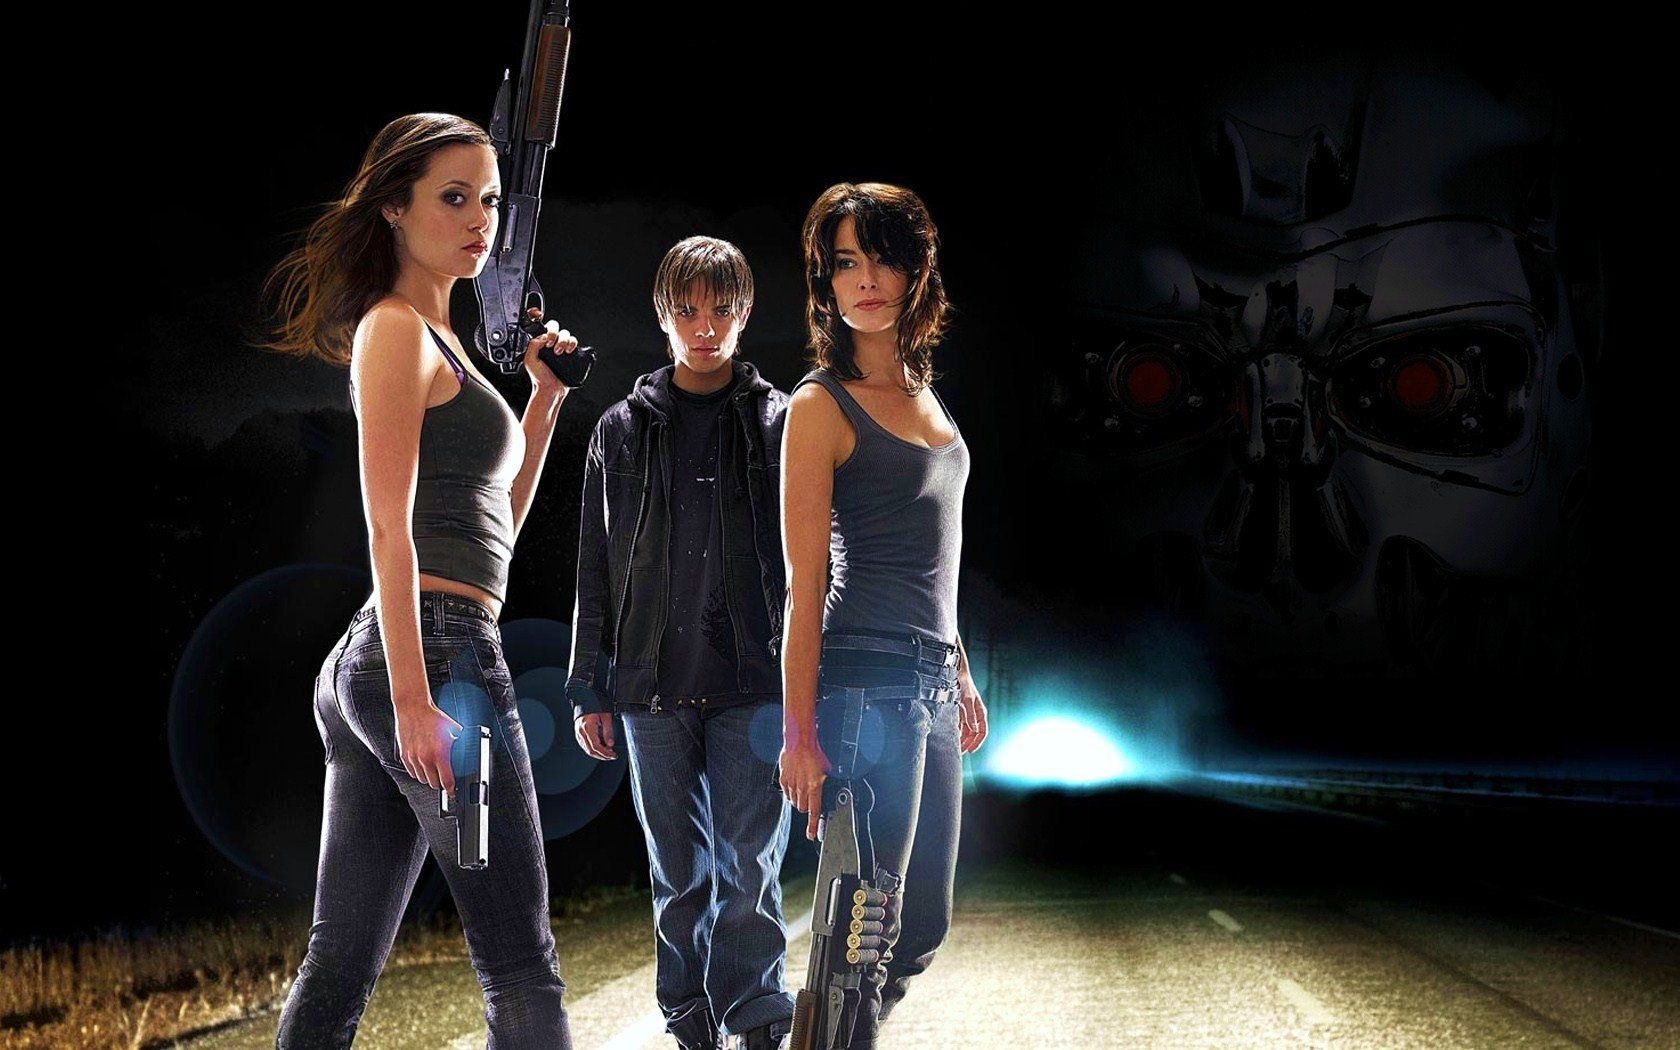 Terminator: The Sarah Connor Chronicles Wallpaper and Background